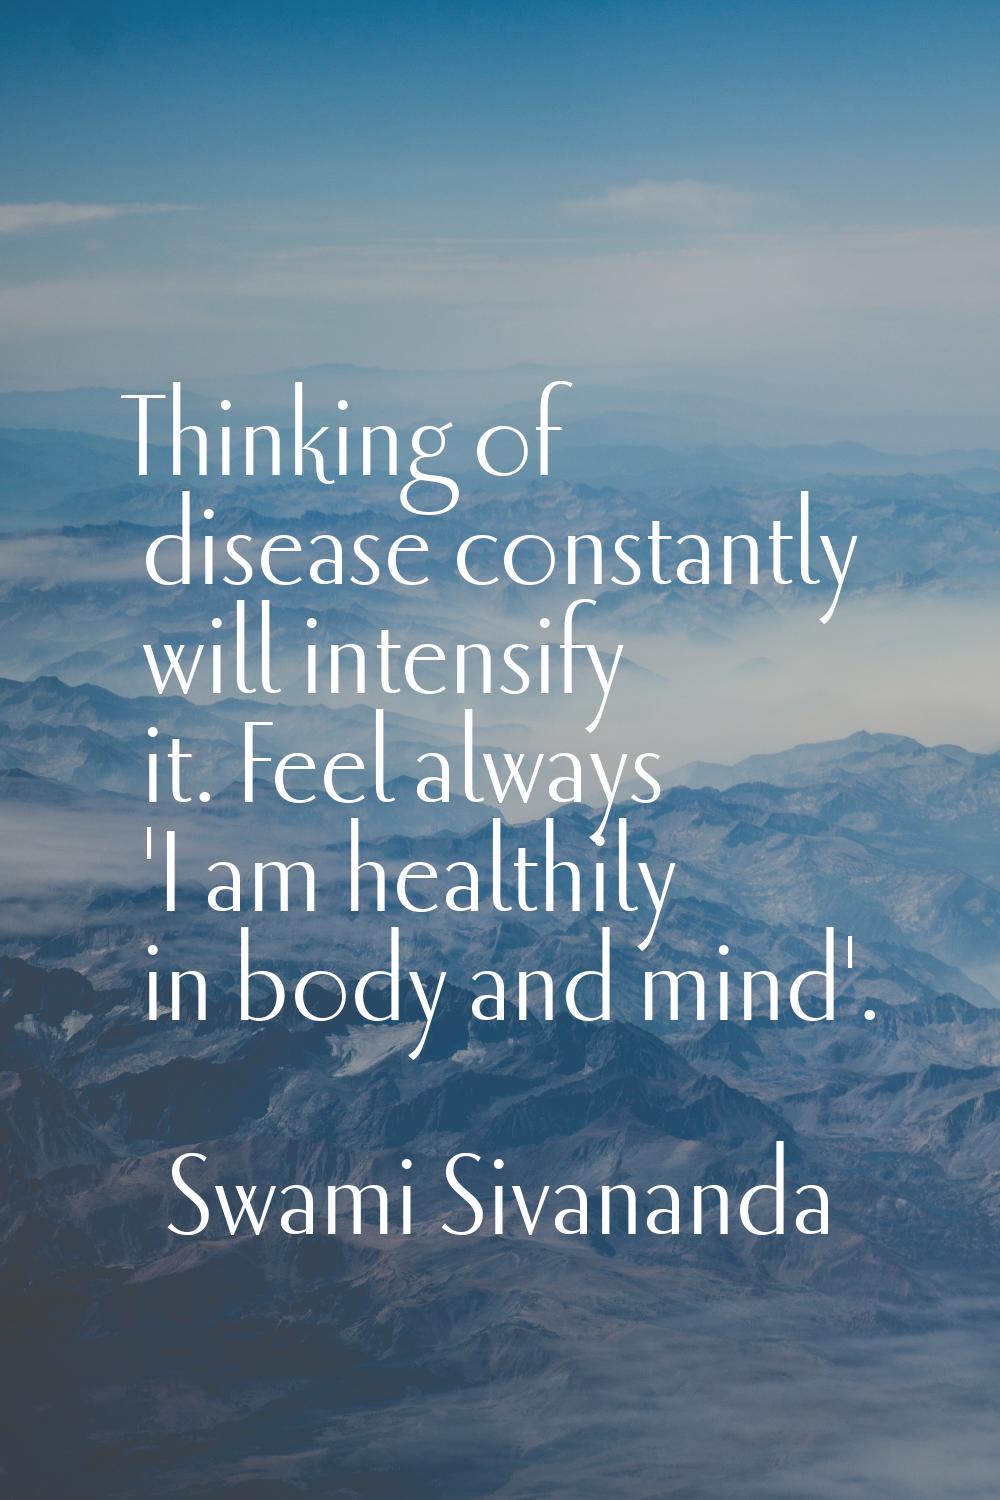 Thinking of disease constantly will intensify it. Feel always 'I am healthily in body and mind'.